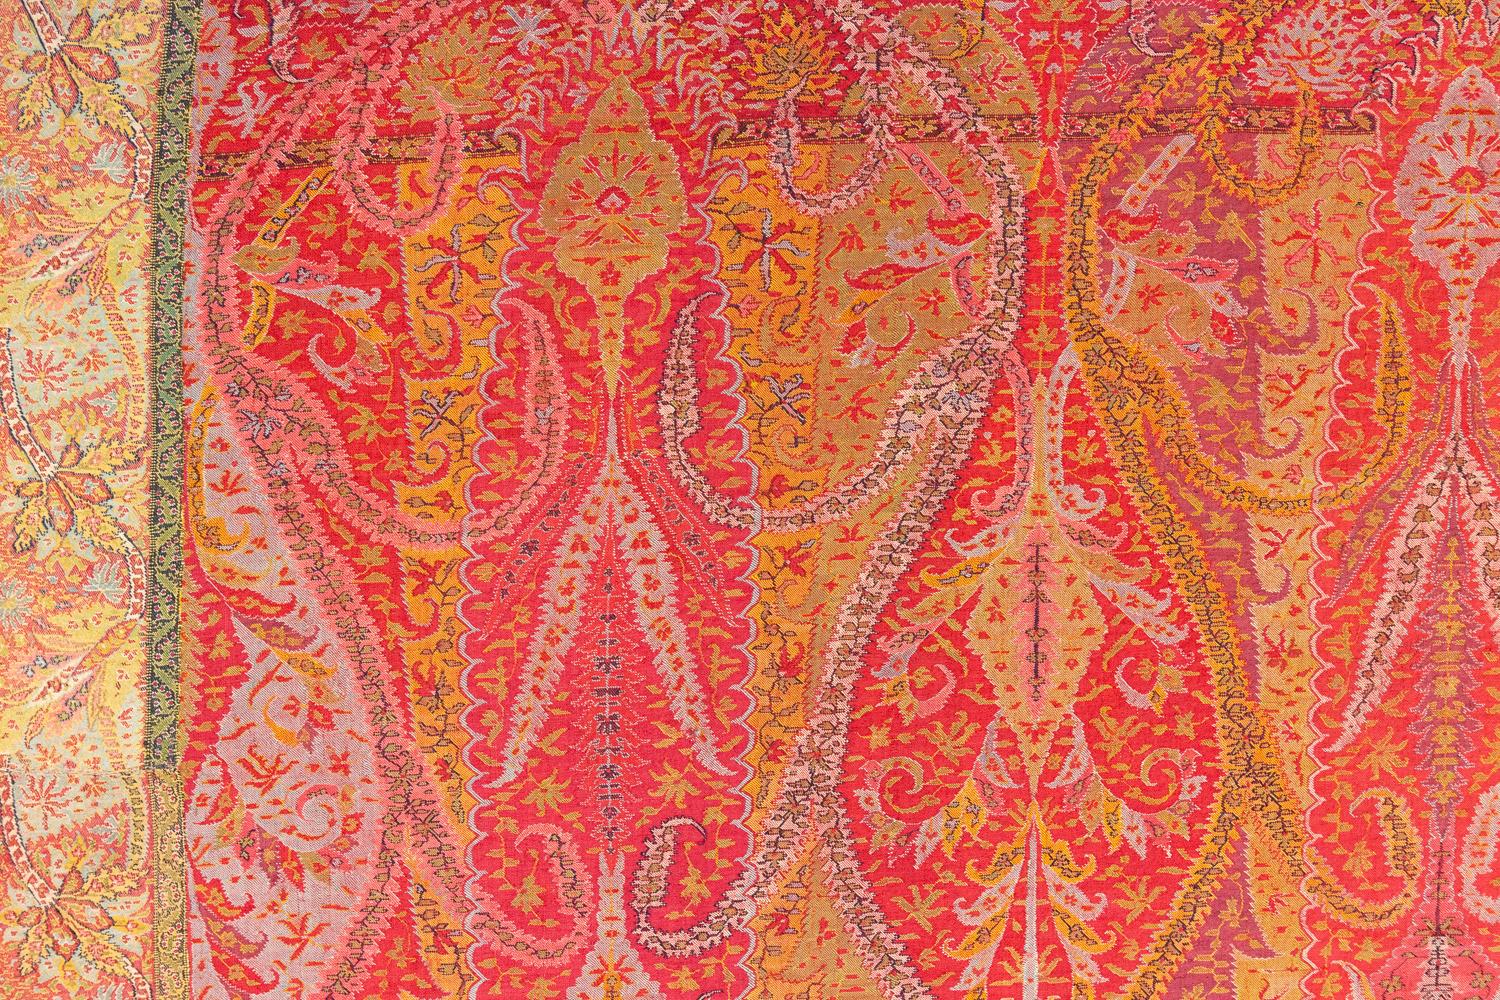 This is an antique Indian cashmere shawl woven during the beginning of the 19th century circa 1800 -1820’s and measures 315 x 144CM in size. The design of this piece is created with two center columns decorated with Paisley and arabesque motifs